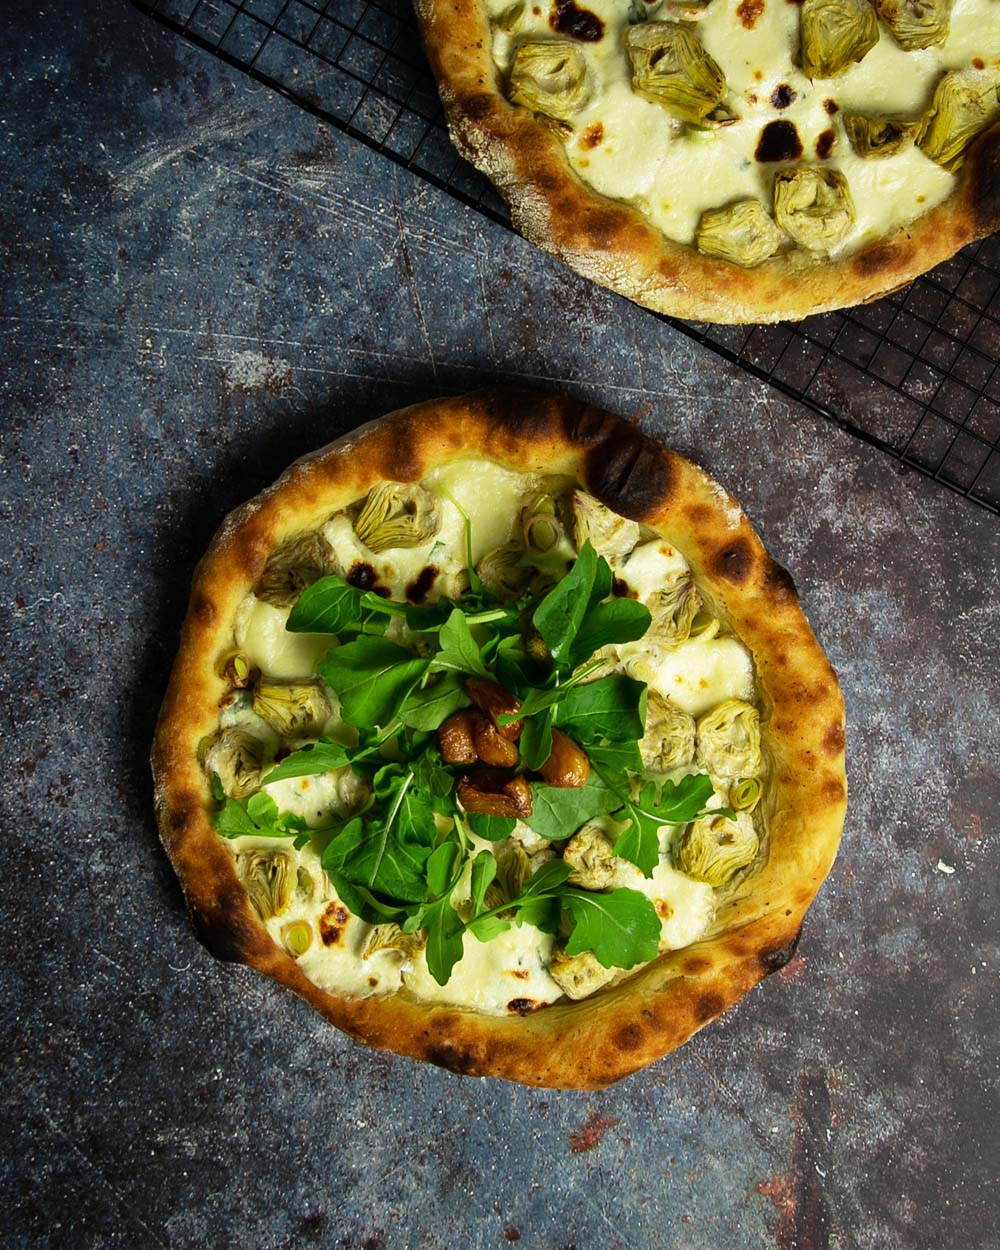 Top view of pizza bianca on a marbled surface topped with fresh arugula and garlic